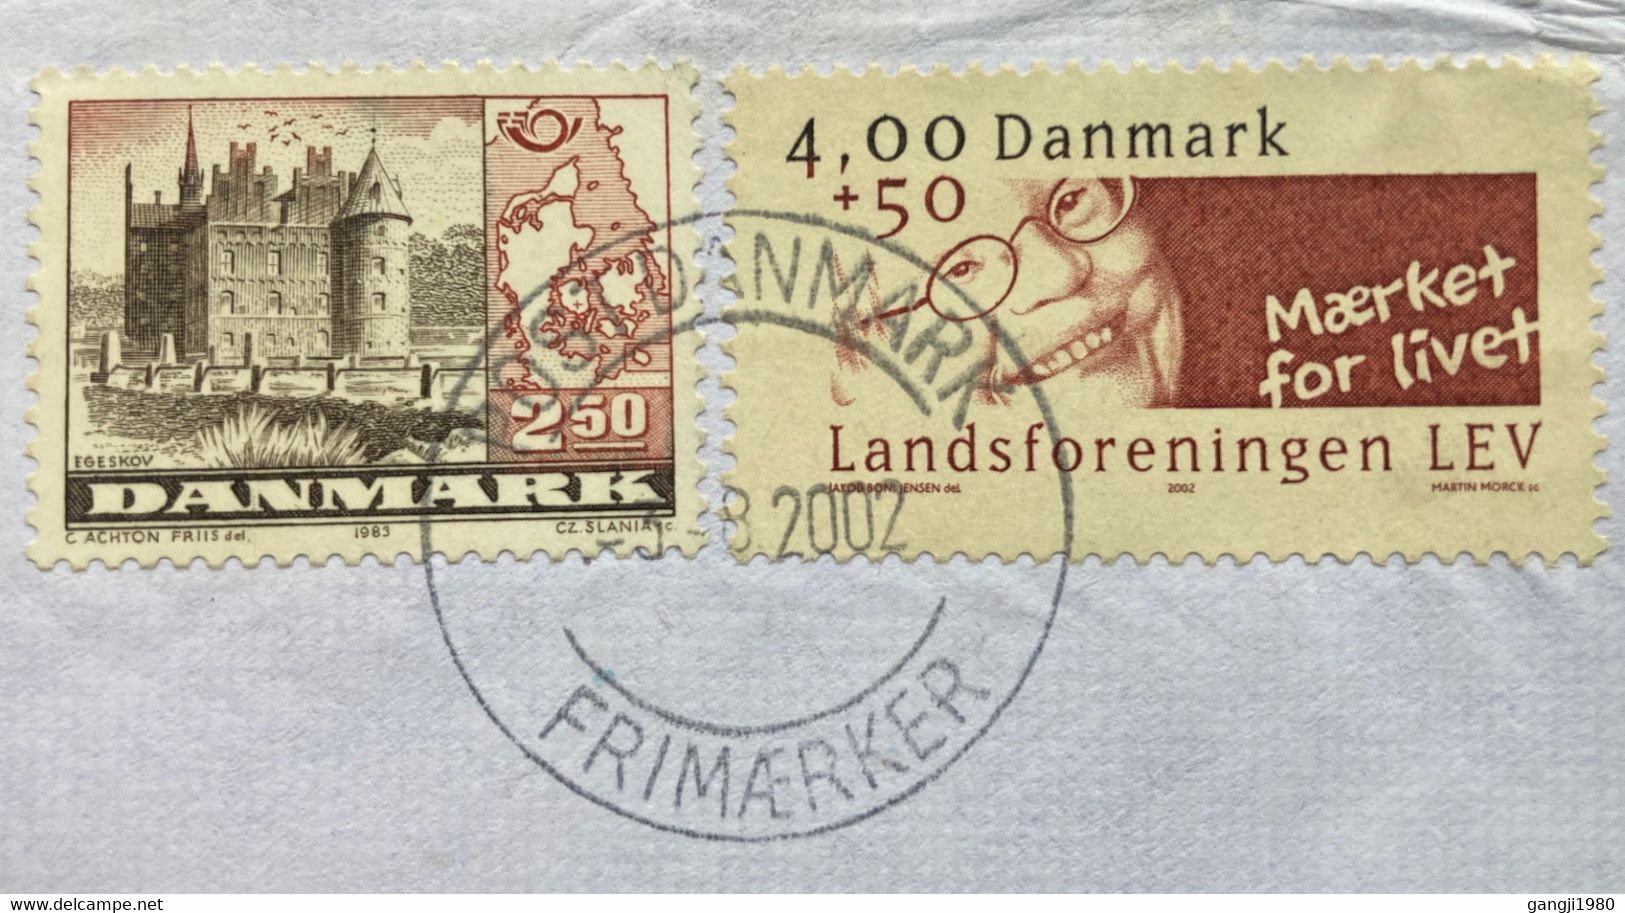 DENMARK 2002, SPECIAL MUSEUM CANCELLATION,VIGNETTE PRIORITAIRE LABEL,BUILDING,ARCHITECTURE,COVER TO INDIA - Covers & Documents